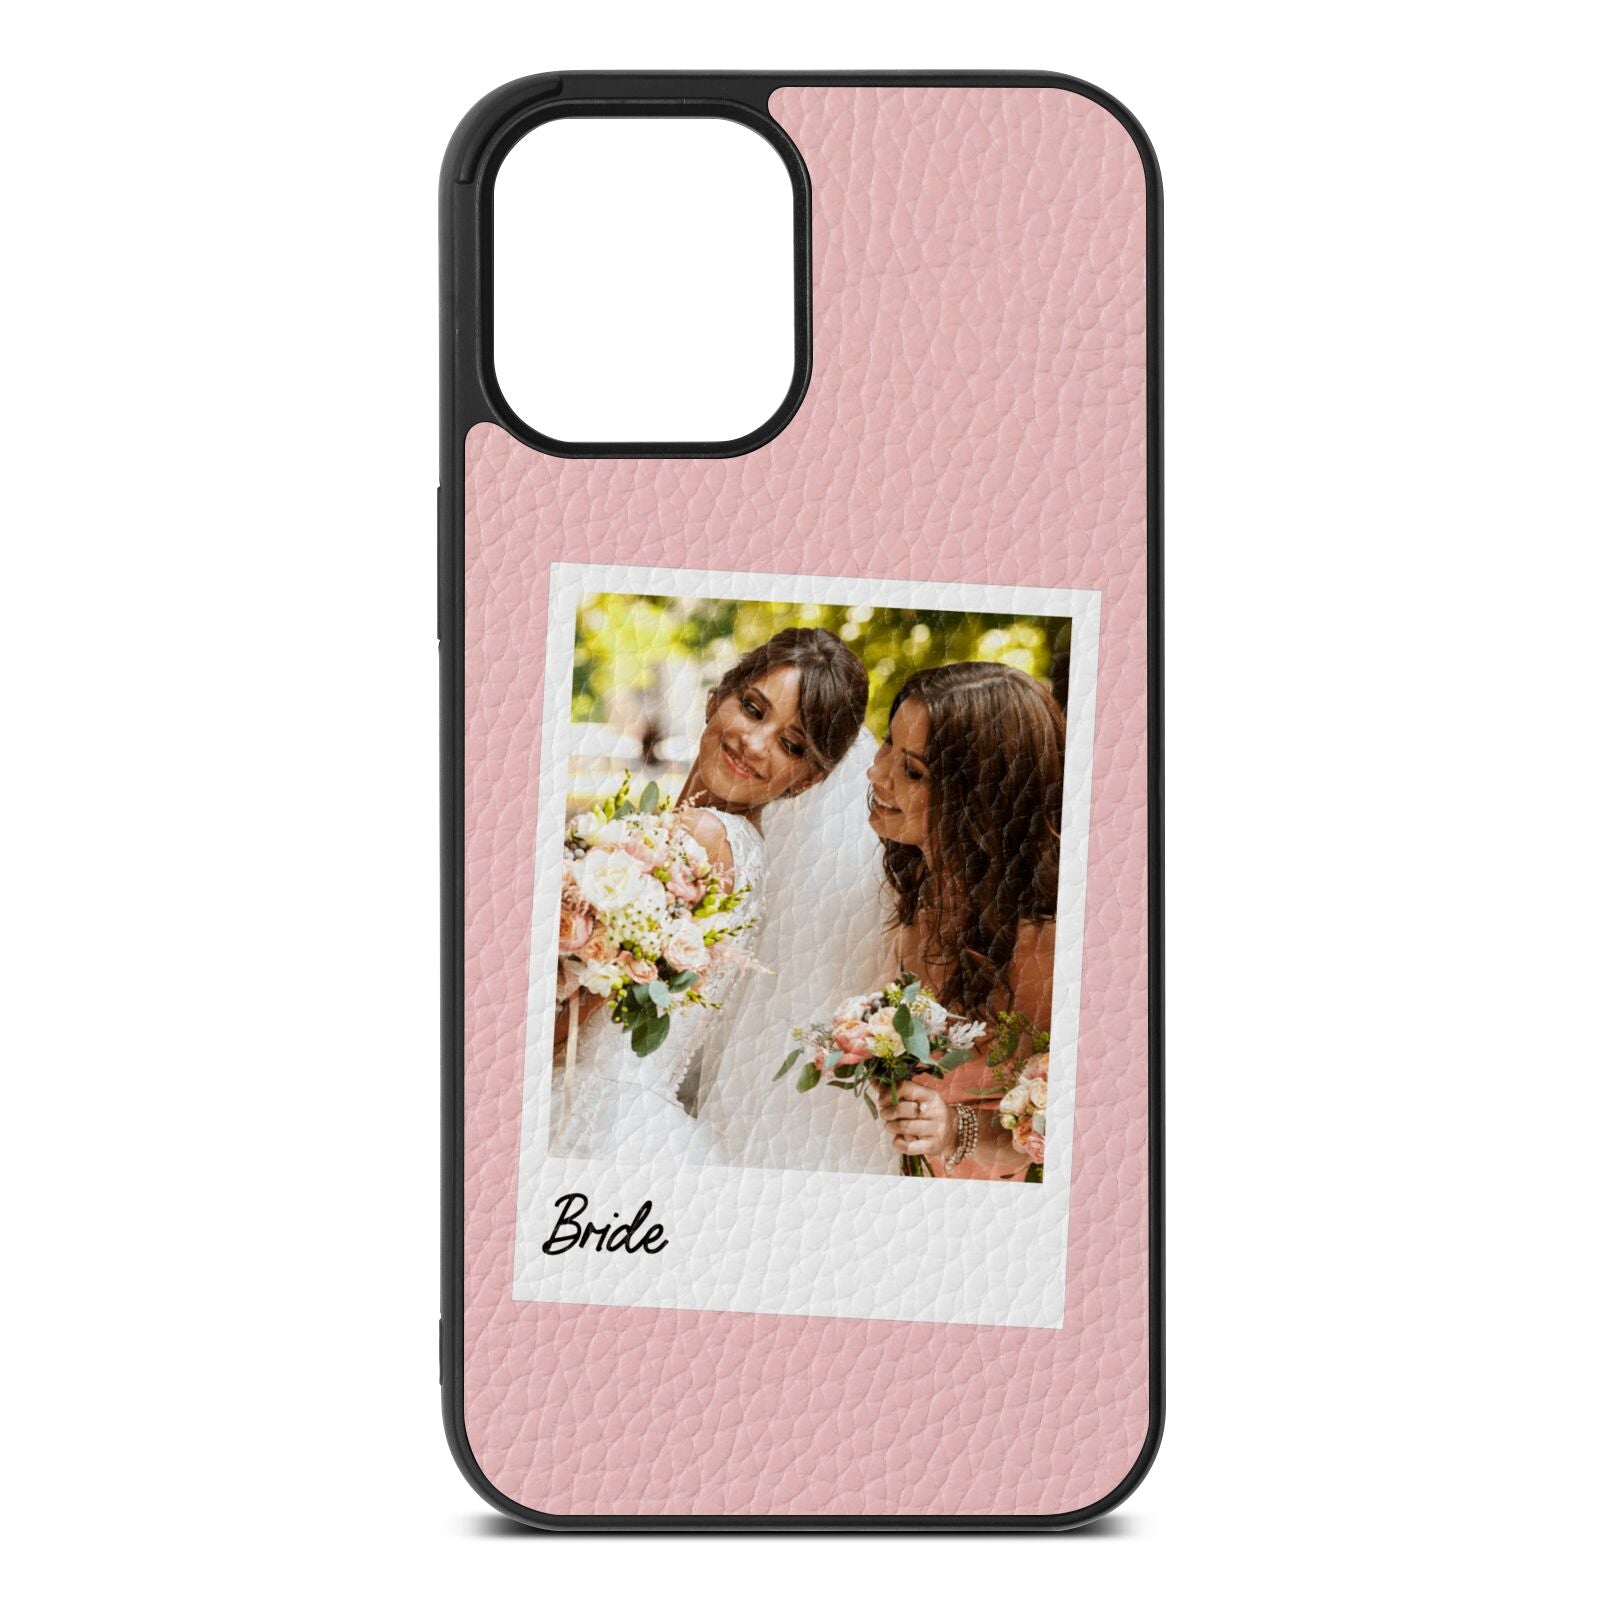 Bridal Photo Pink Pebble Leather iPhone 12 Pro Max Case